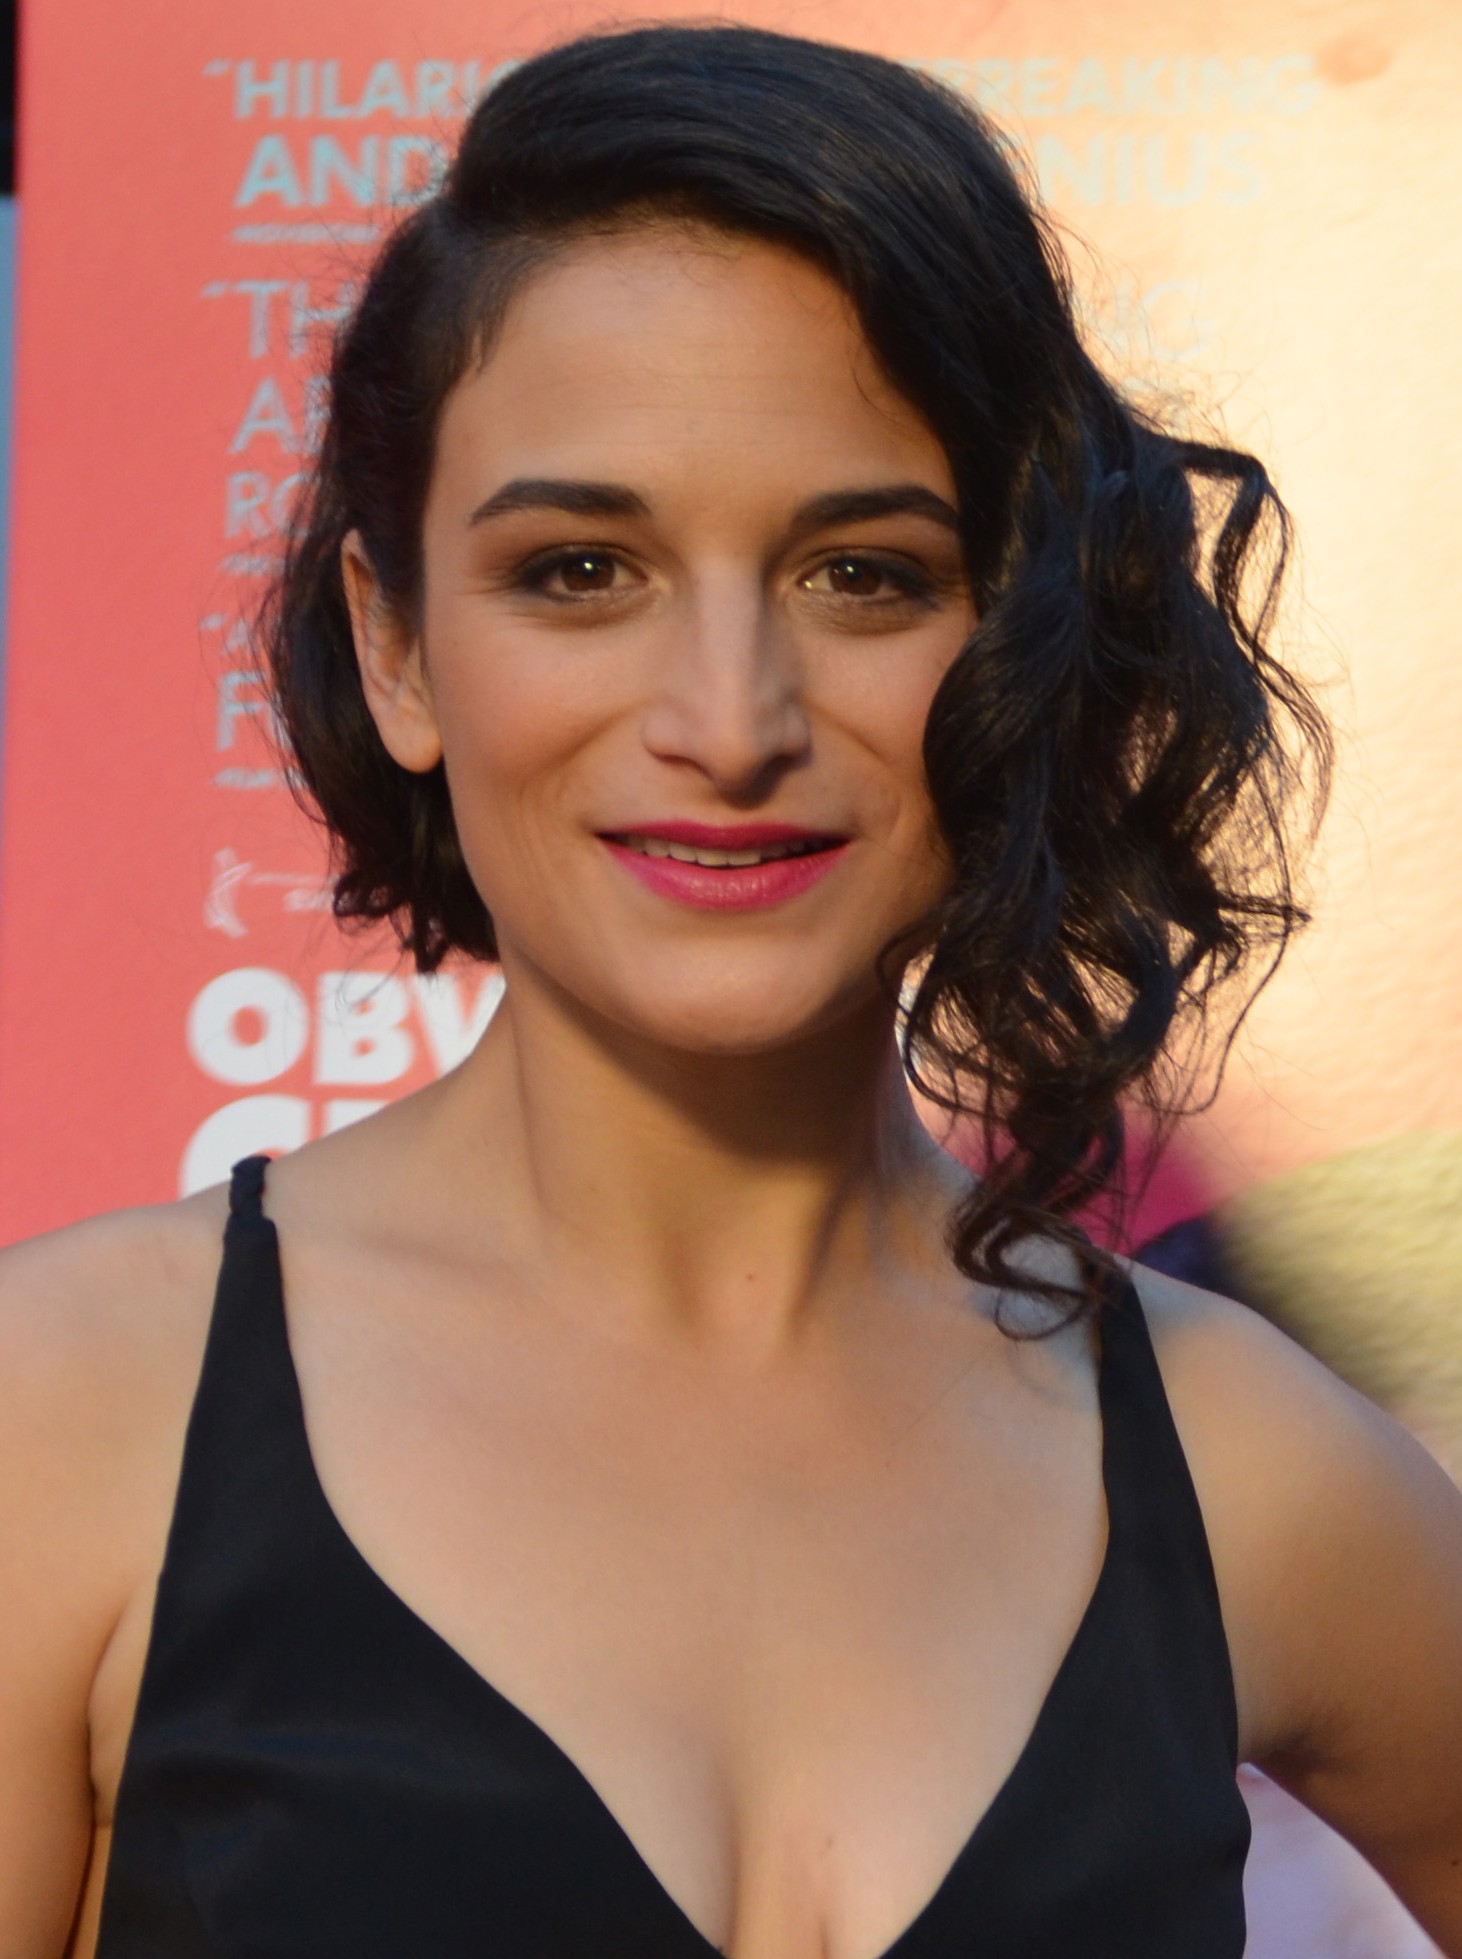 Jenny_Slate_Obvious_Child_Premiere_2014_(cropped)